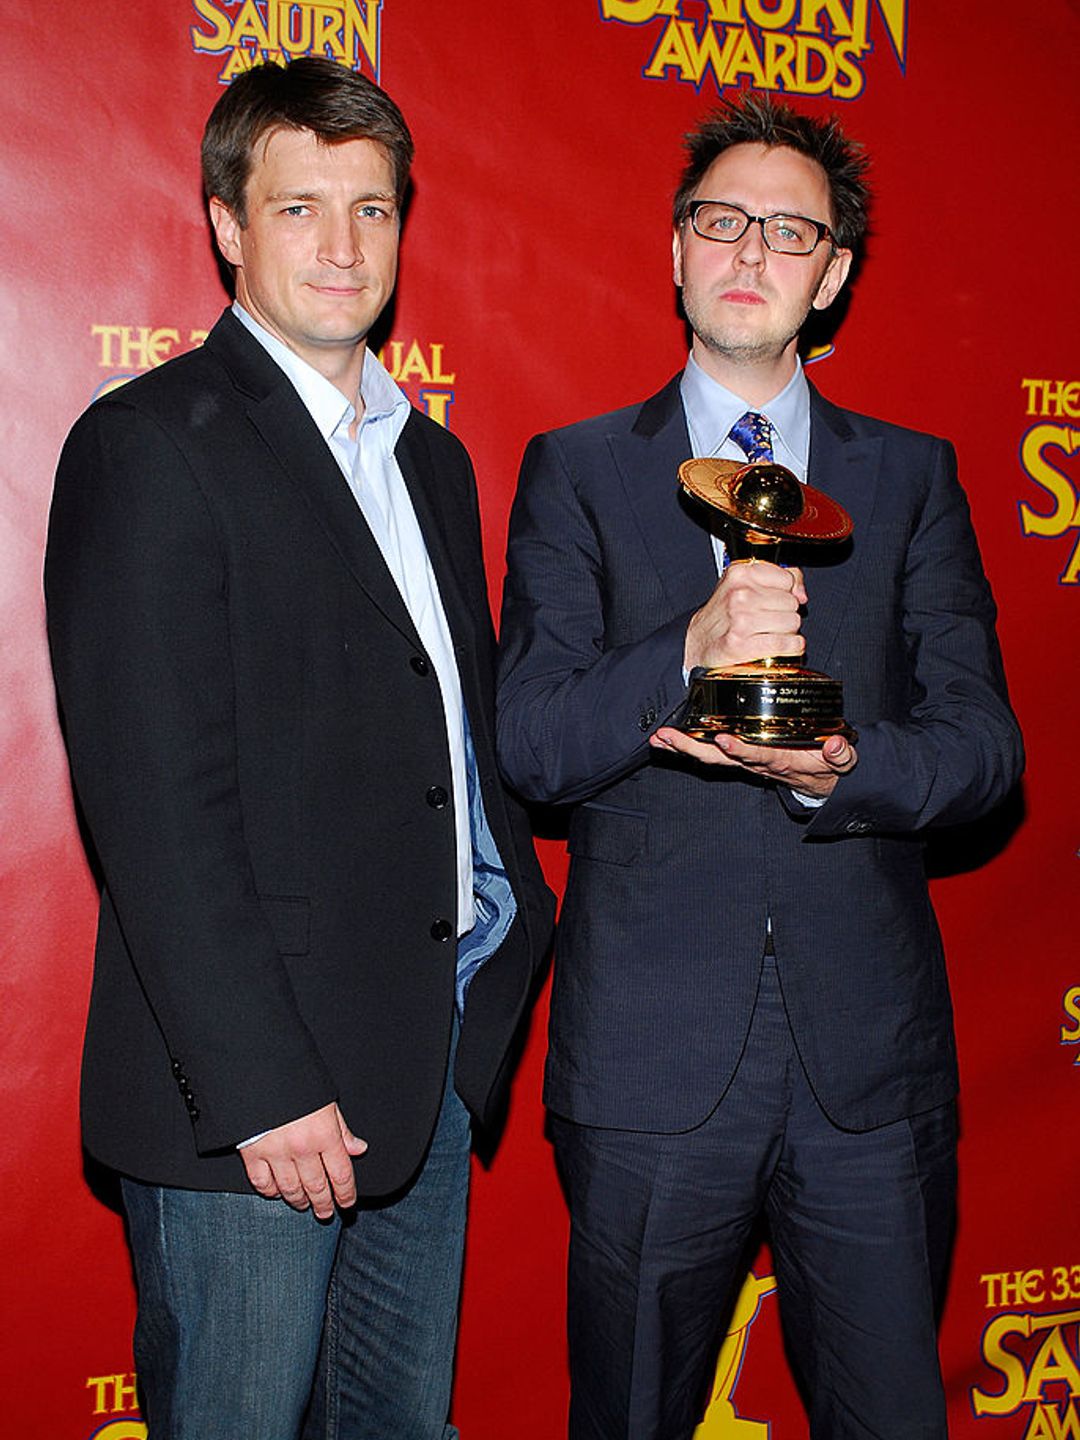 Nathan Fillion and director James Gunn smiling together in 2007